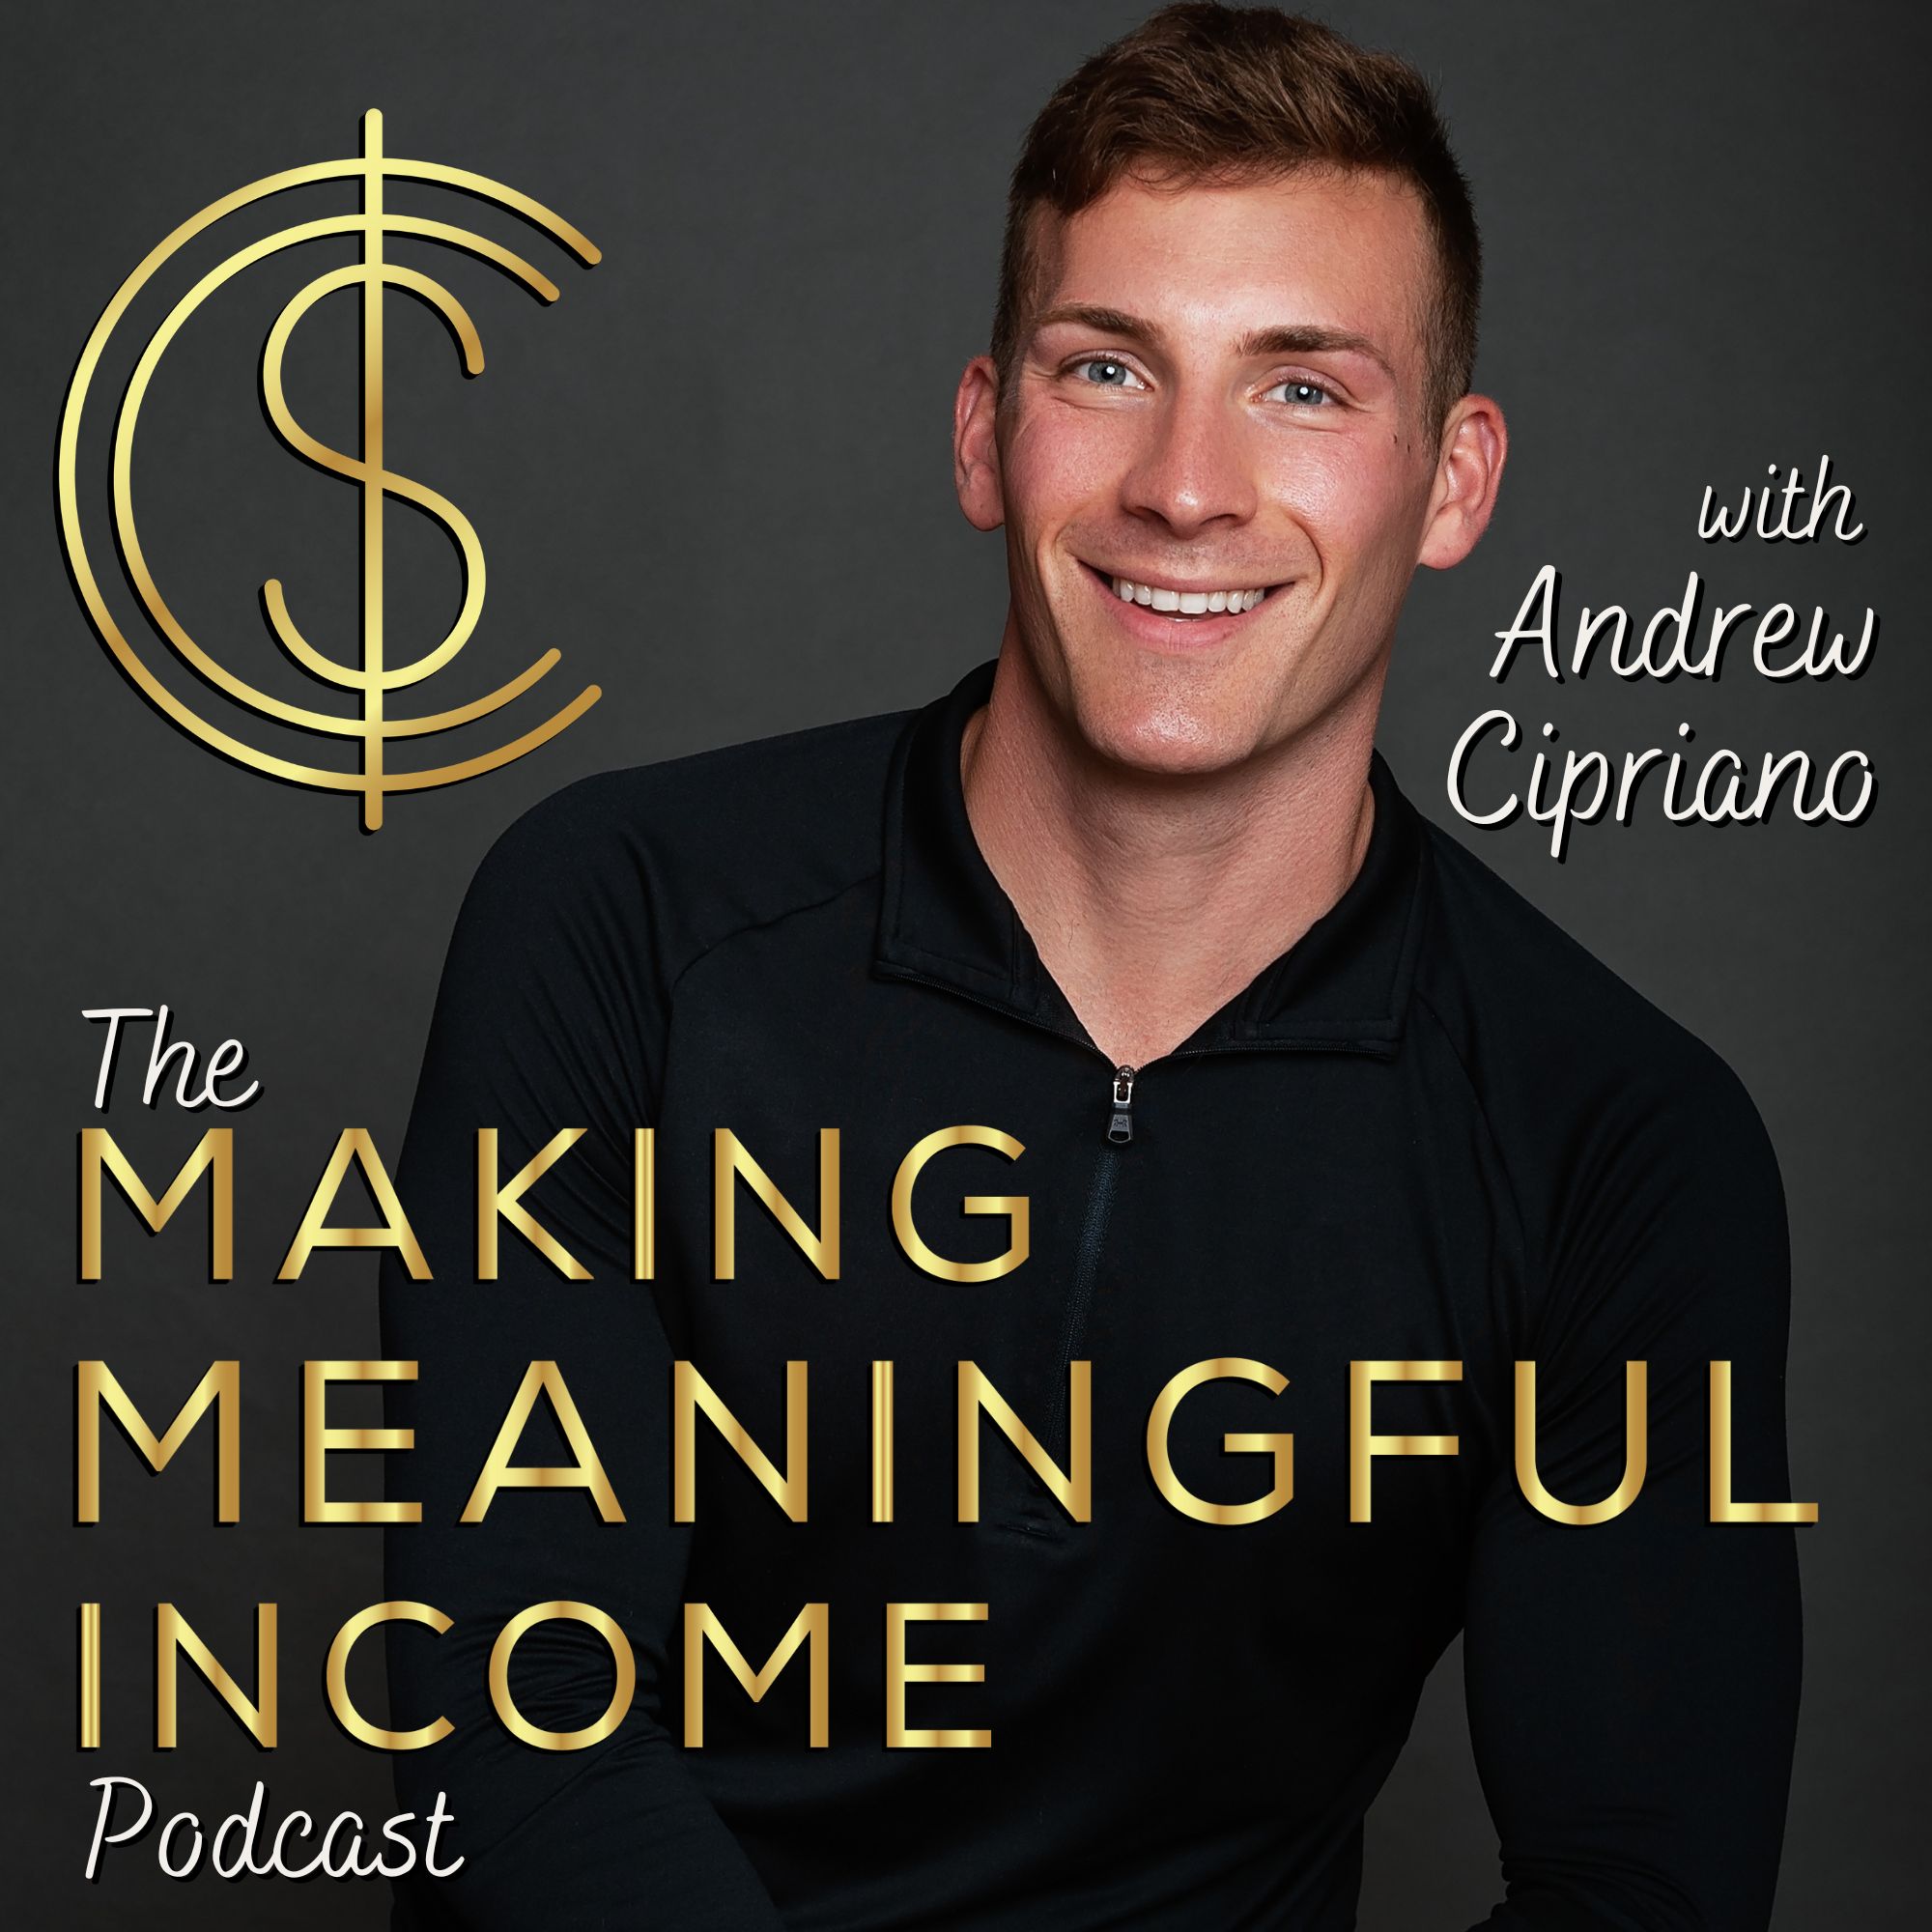 Artwork for The Making Meaningful Income Podcast